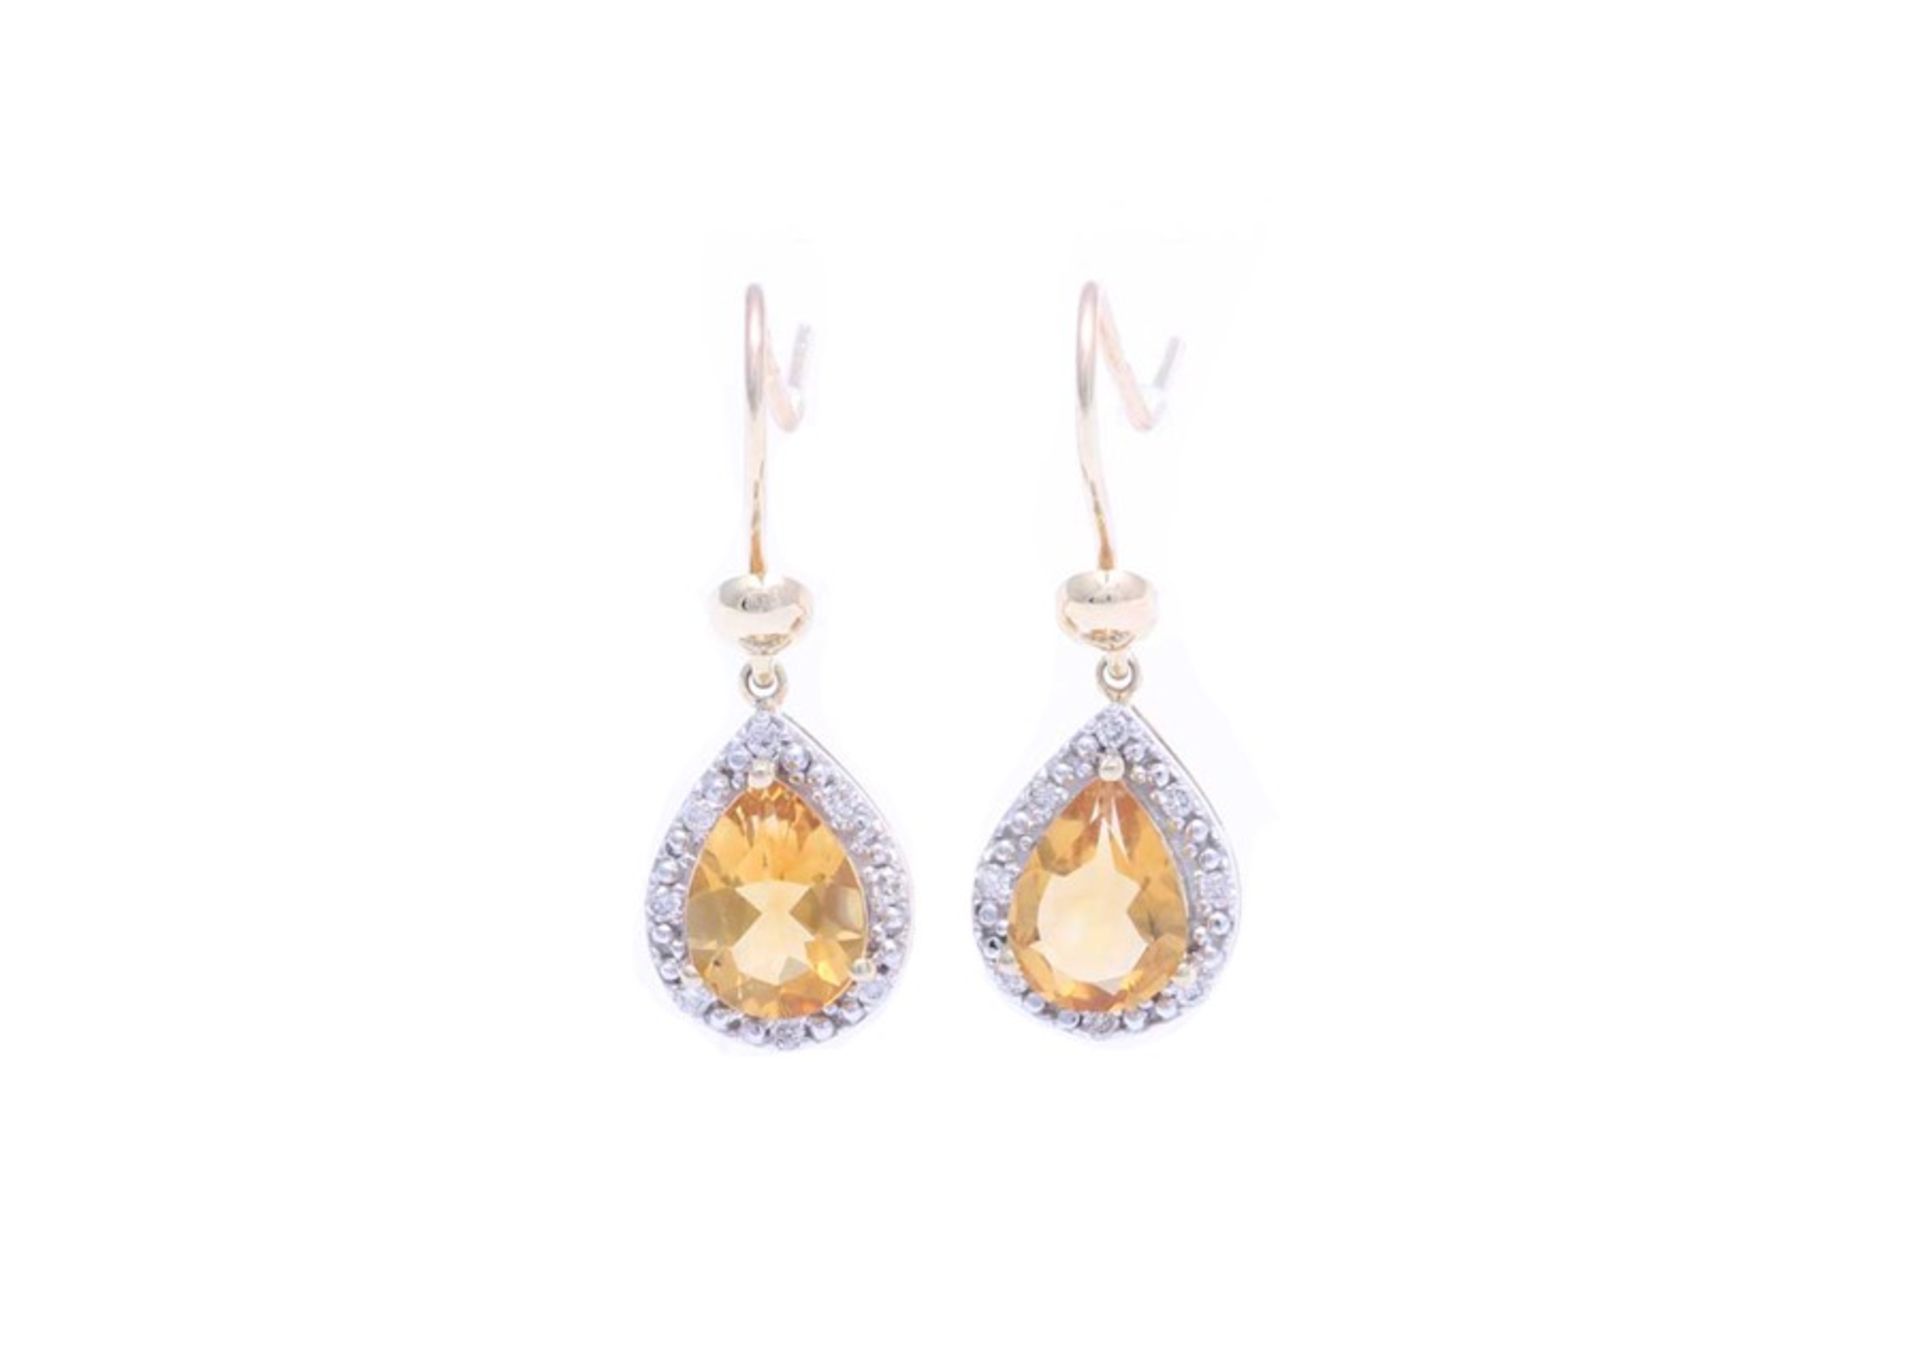 Valued by GIE £1,970.00 - 9ct Yellow Gold Citrine Diamond Earring 0.13 Carats - 7280001C, Colour-